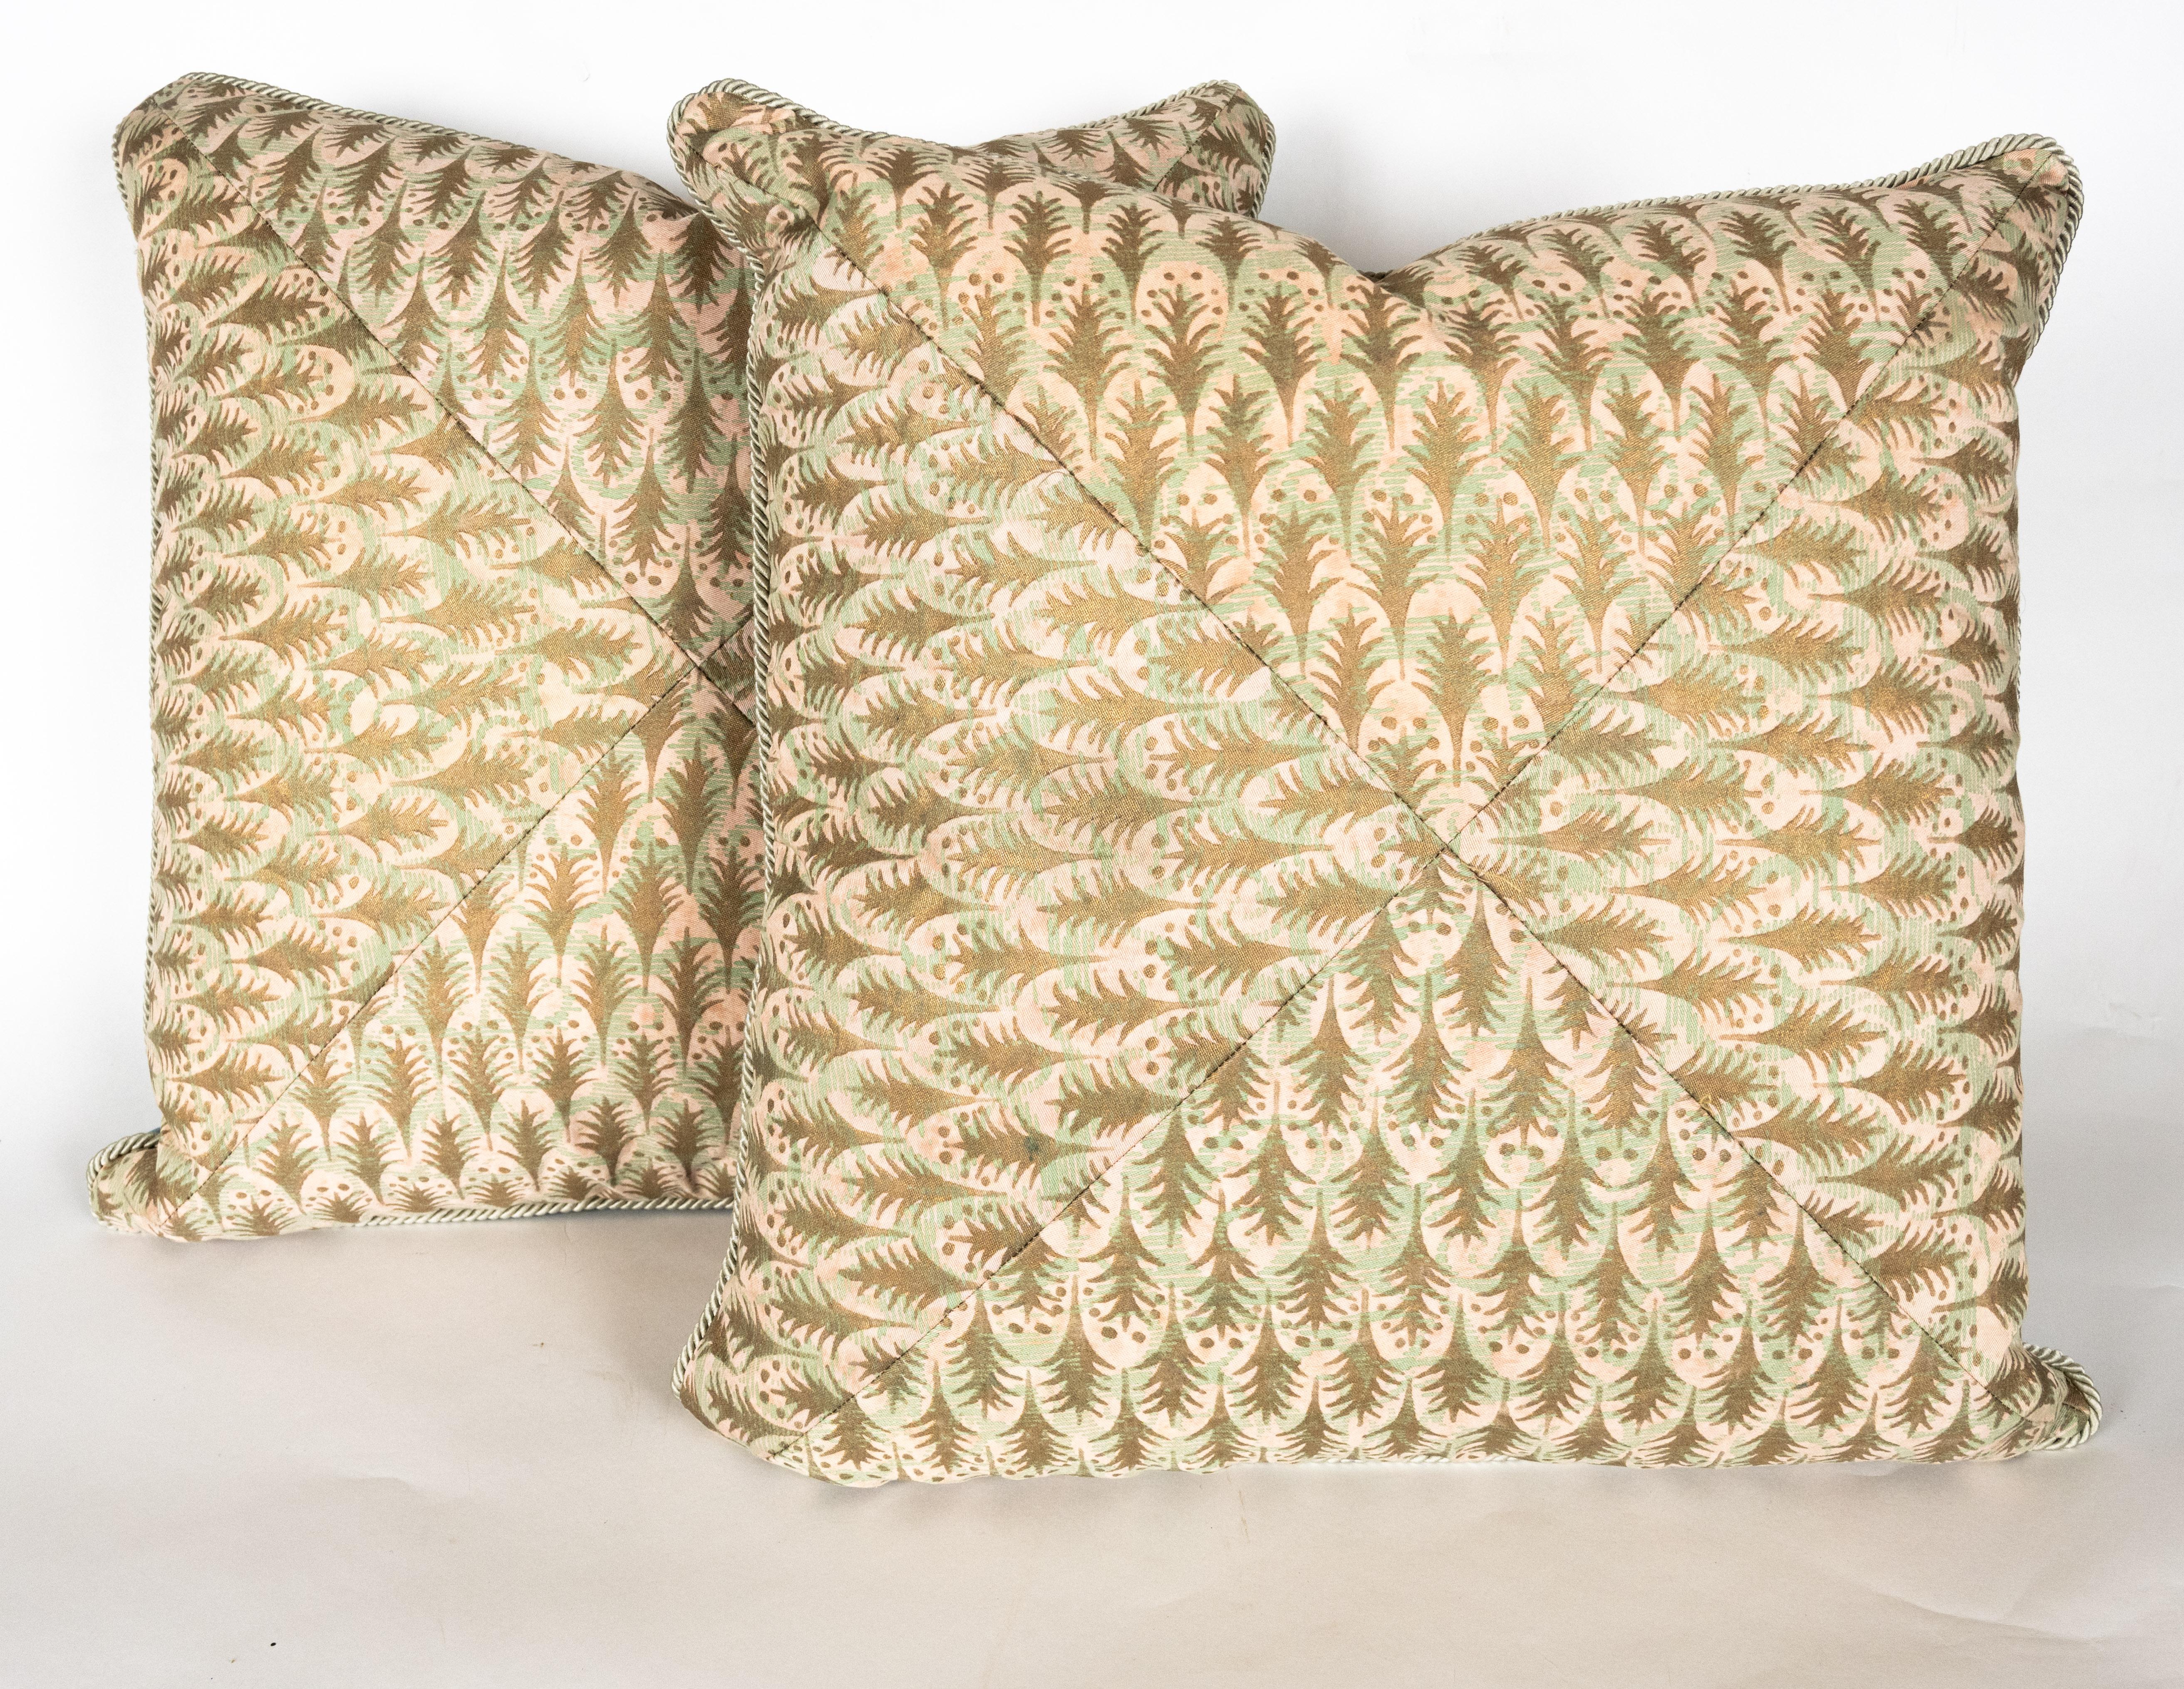 A pair of Fortuny fabric mitered cushions in the Puimette pattern, shell pink, powder blue, and gold color way with braided edging. Backing features light blue silk fabric with brushed texture. The pattern, a 15th century Persian design with feather